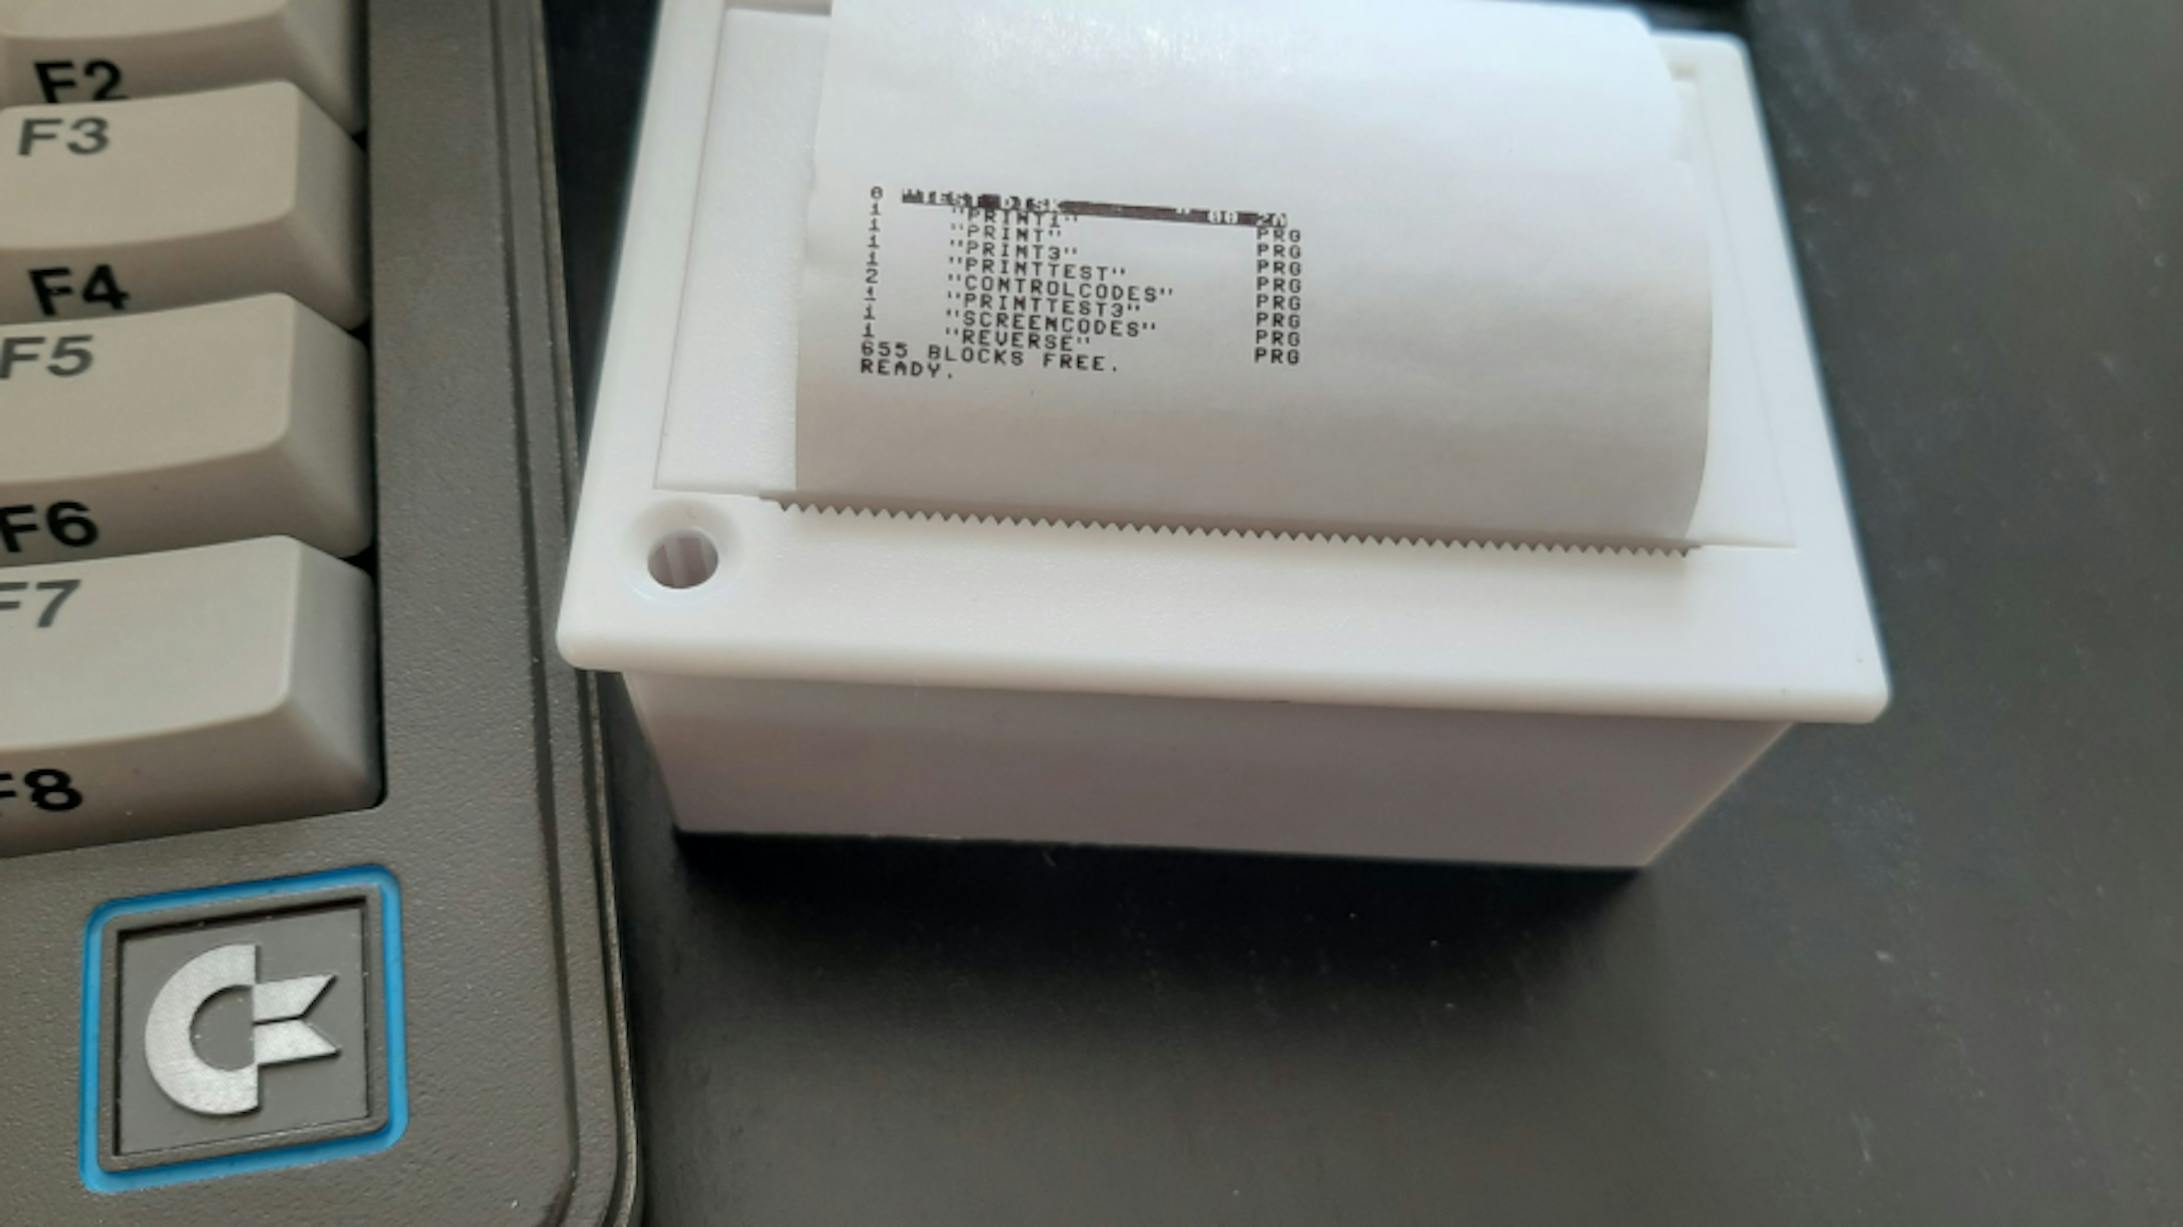 How To Connect a Thermal Printer to an Arduino Board